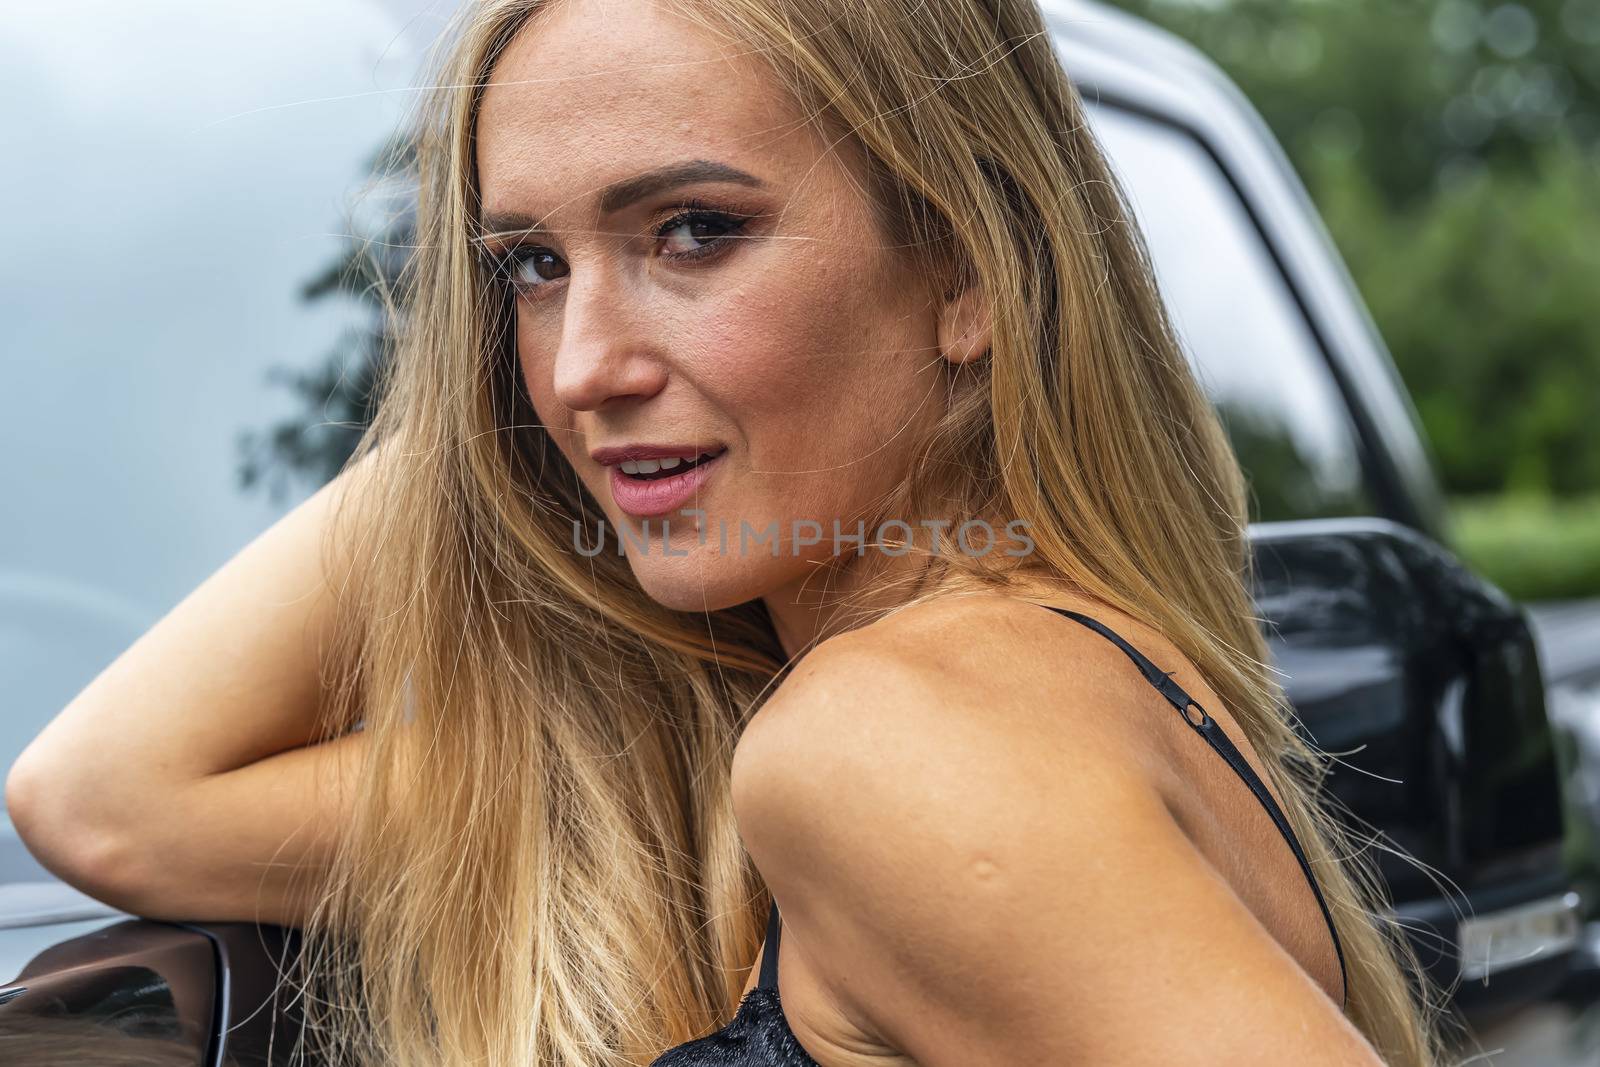 A Lovely Blonde Model Poses Outdoors With Her Black Truck On A Fall Day by actionsports